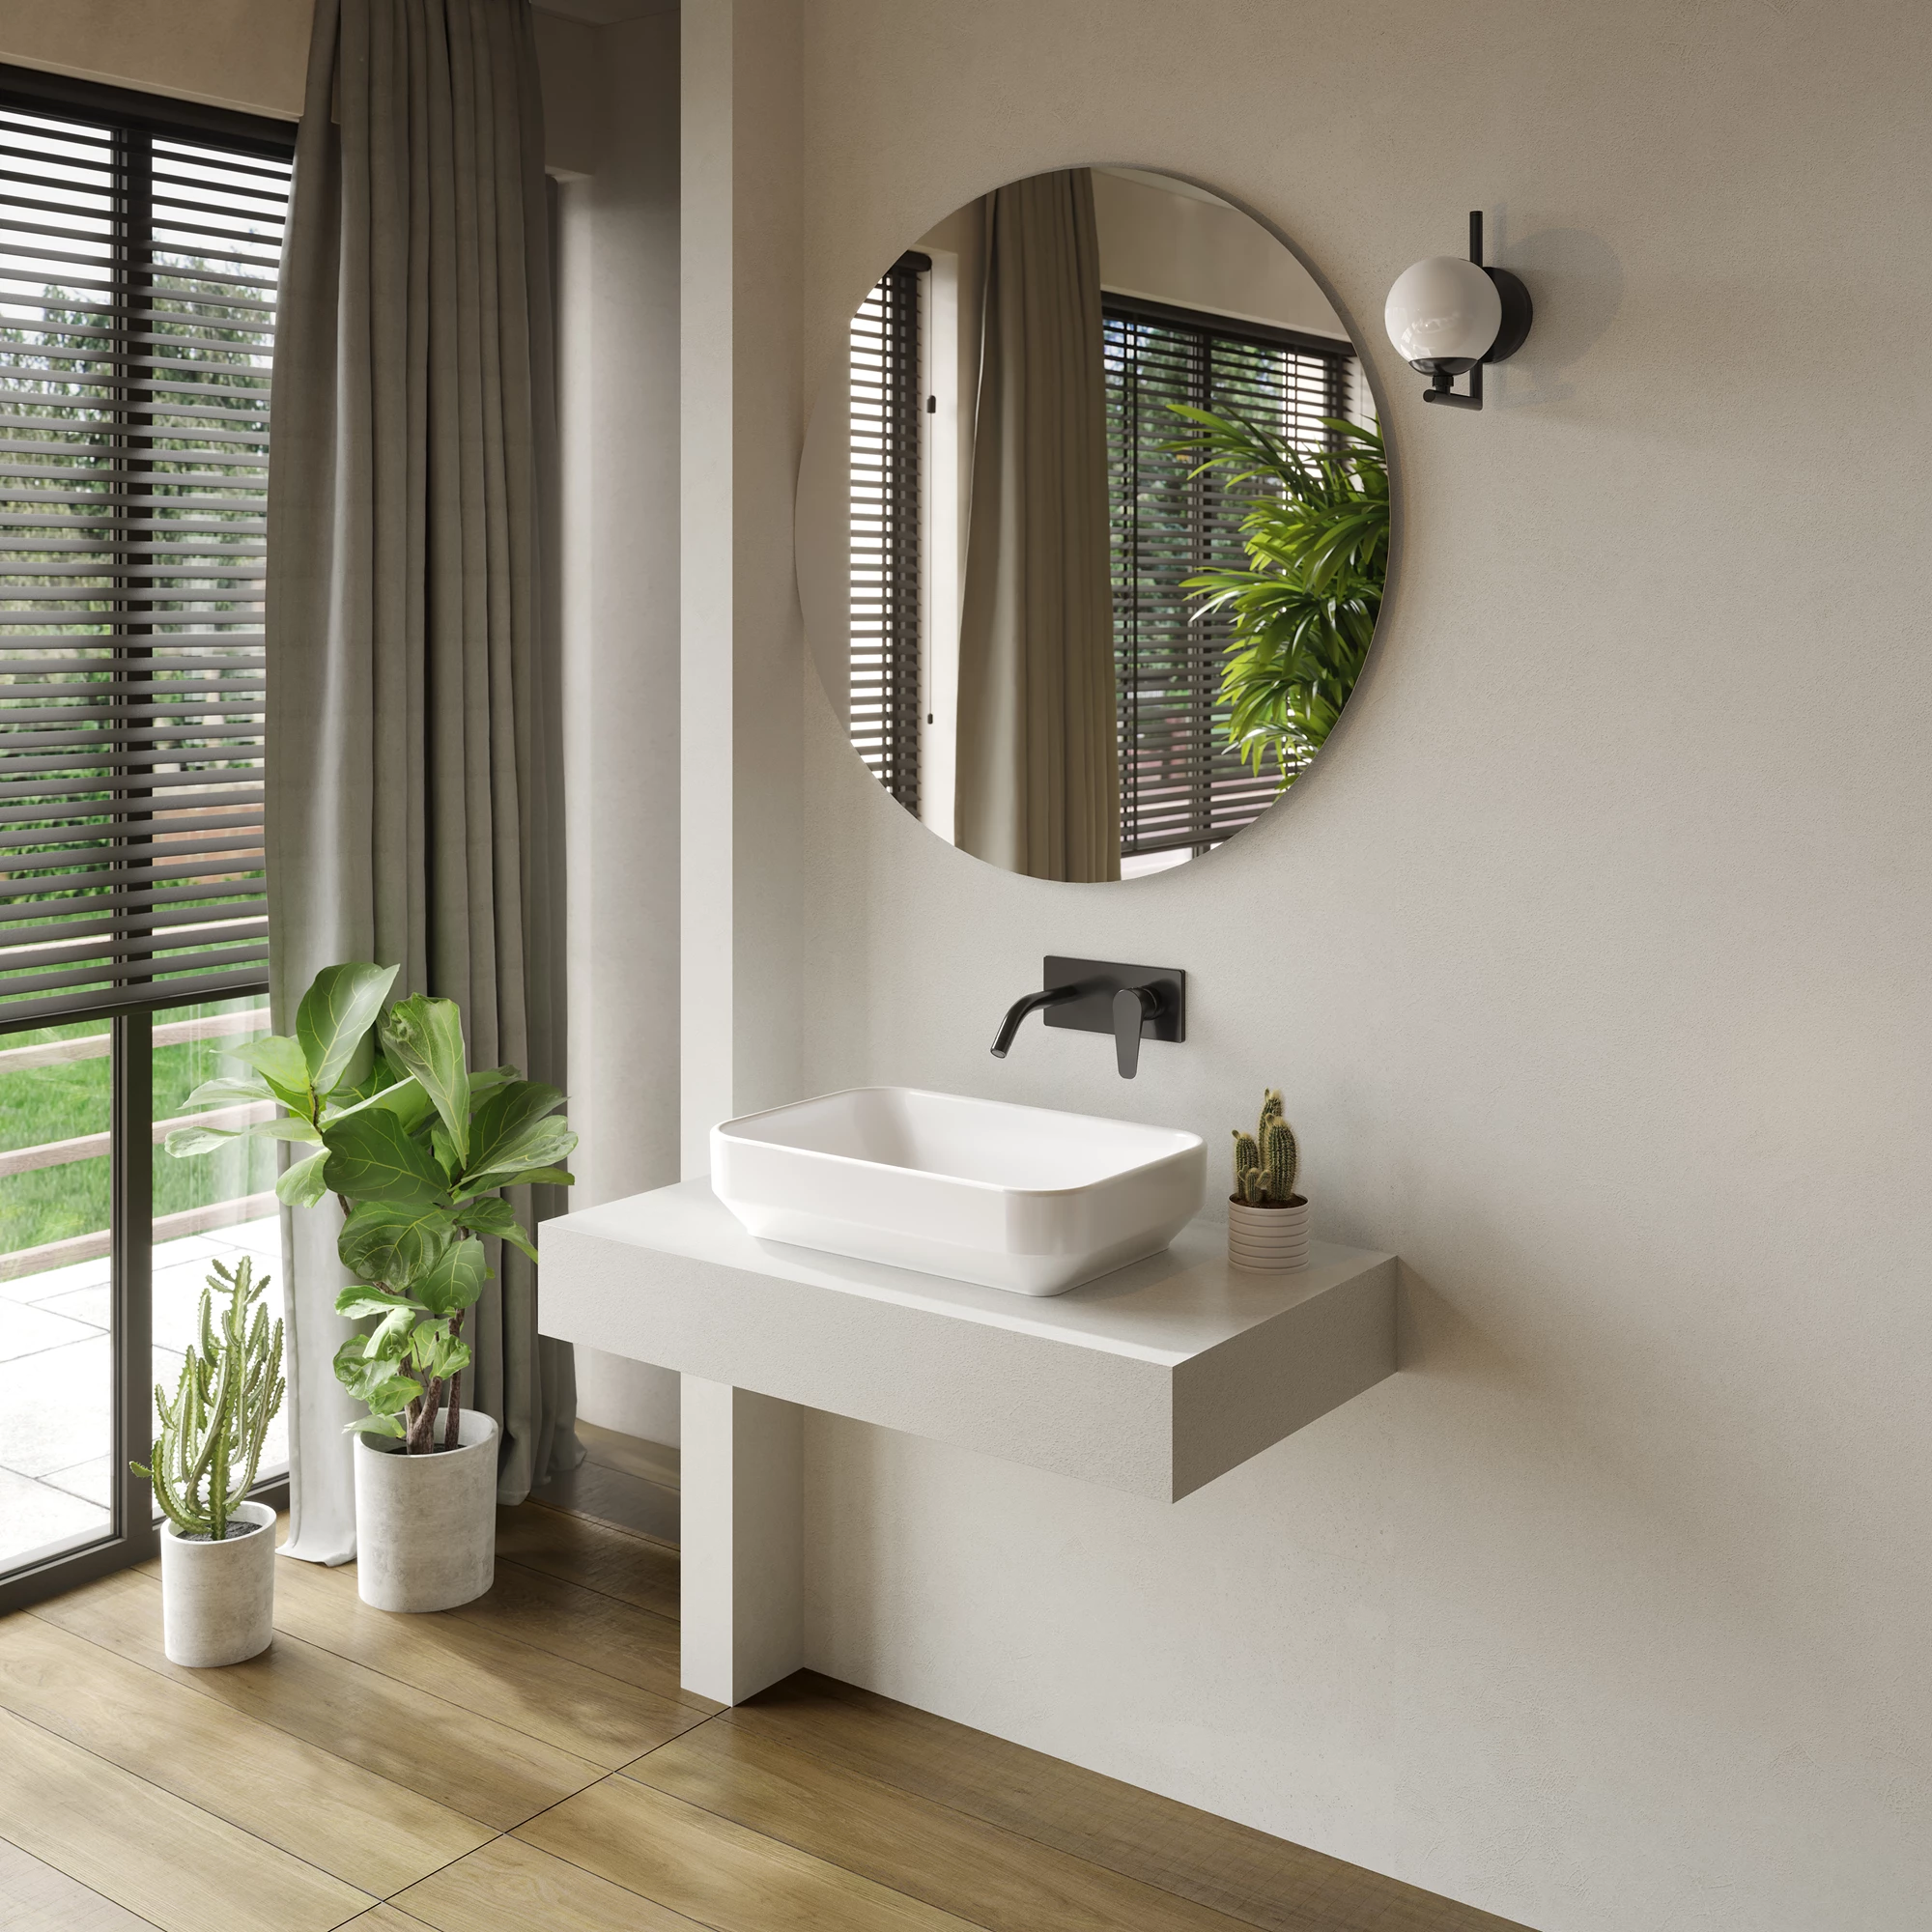 Fold Pro Smart Wall Hung Wc With Bidet Function